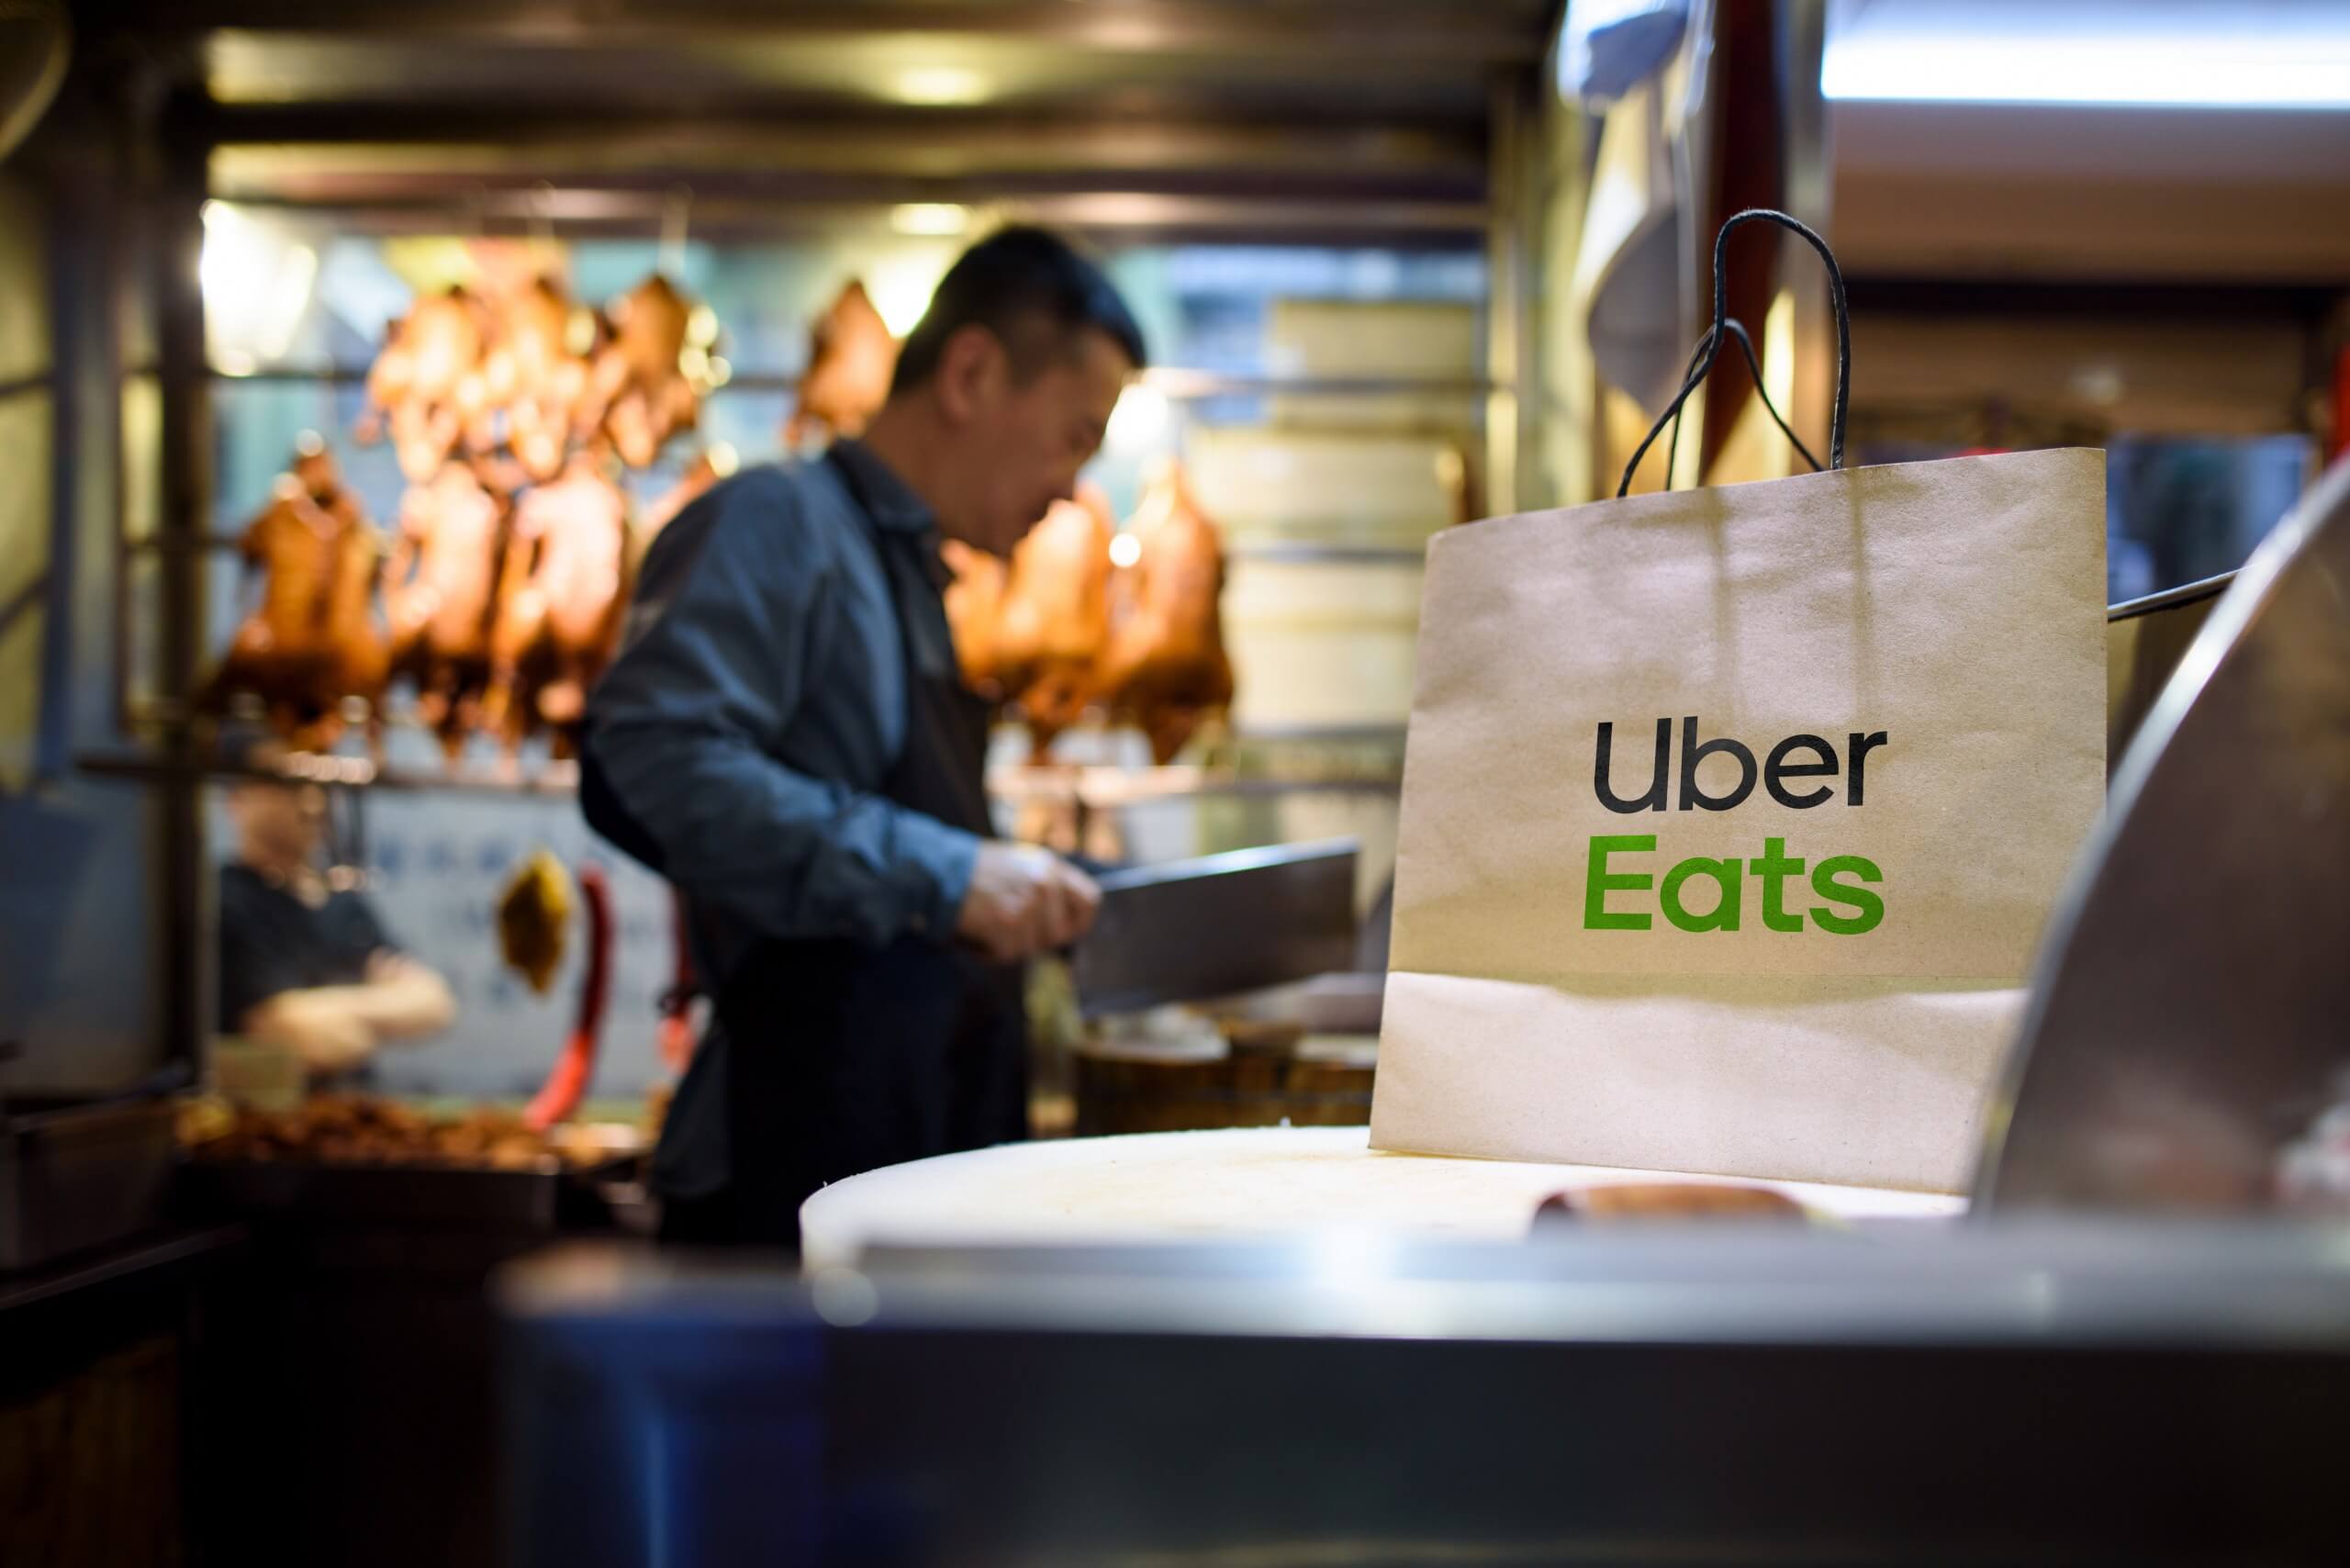 Uber sold its food delivery business in India to local rival Zomato